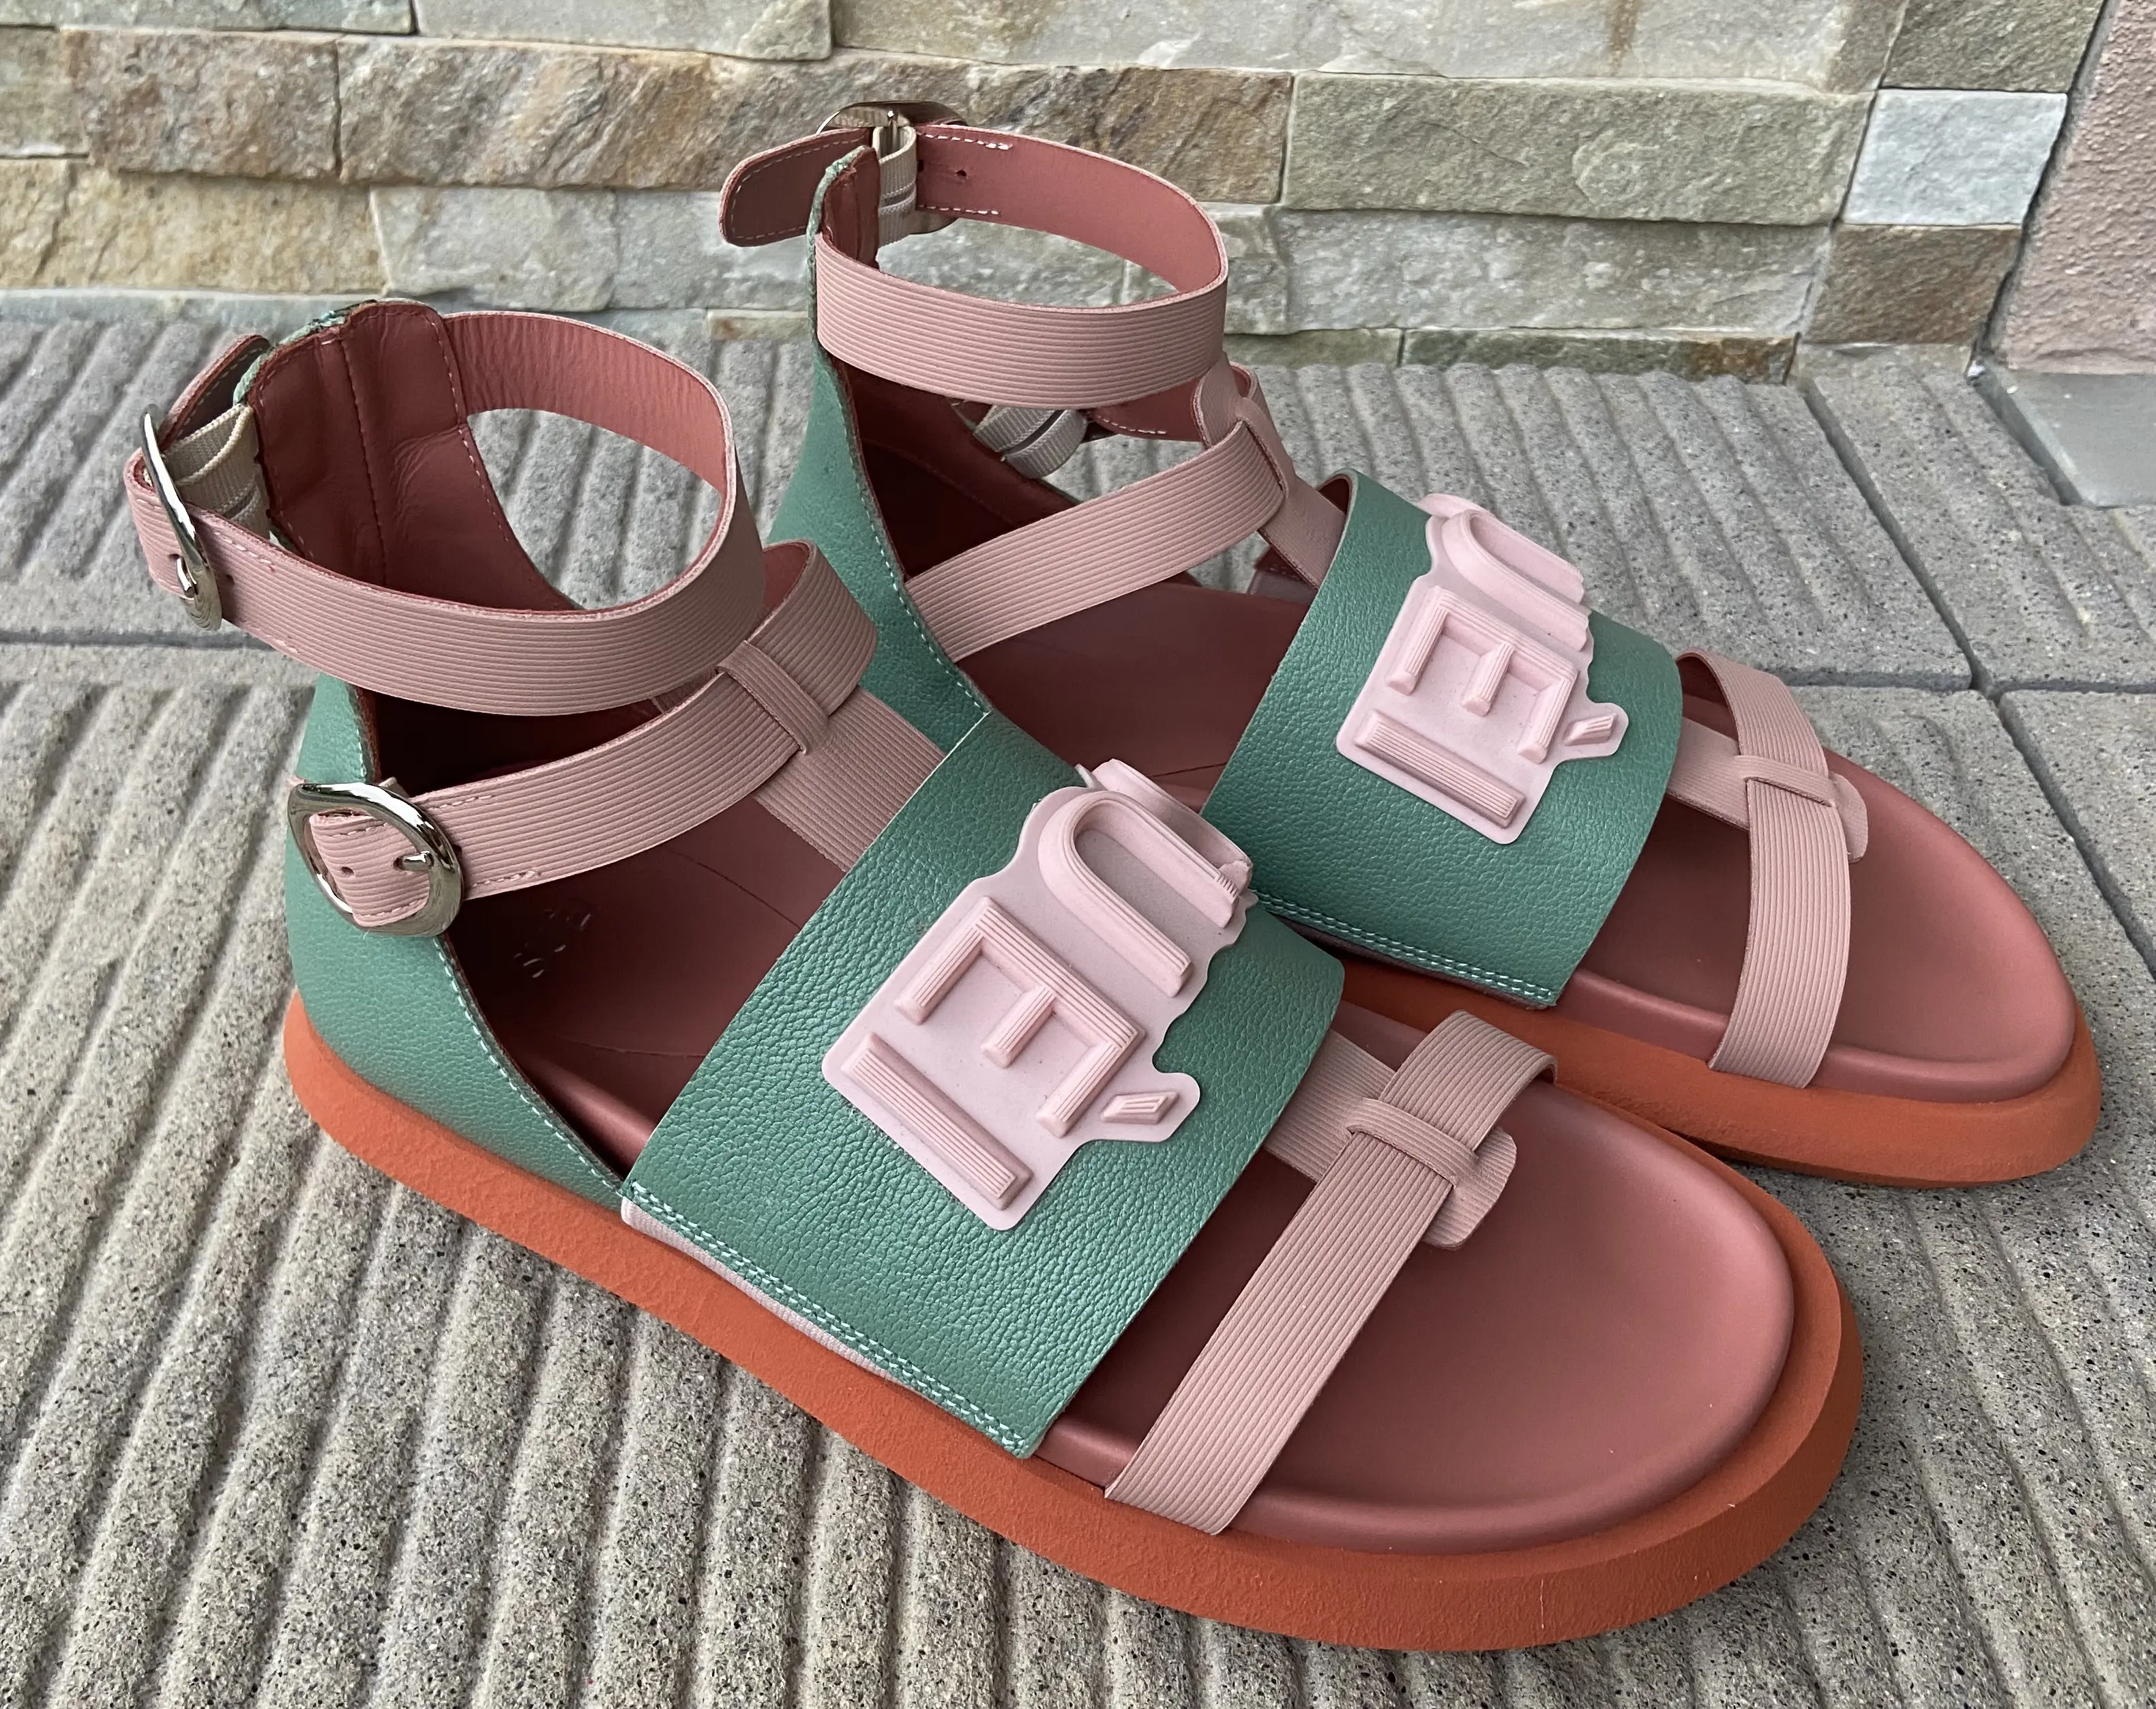 Top Quality Made in Italy Leather Two tones Light Pink and Tiffany Color Comfortable Flat Shoes Fashion Sandals